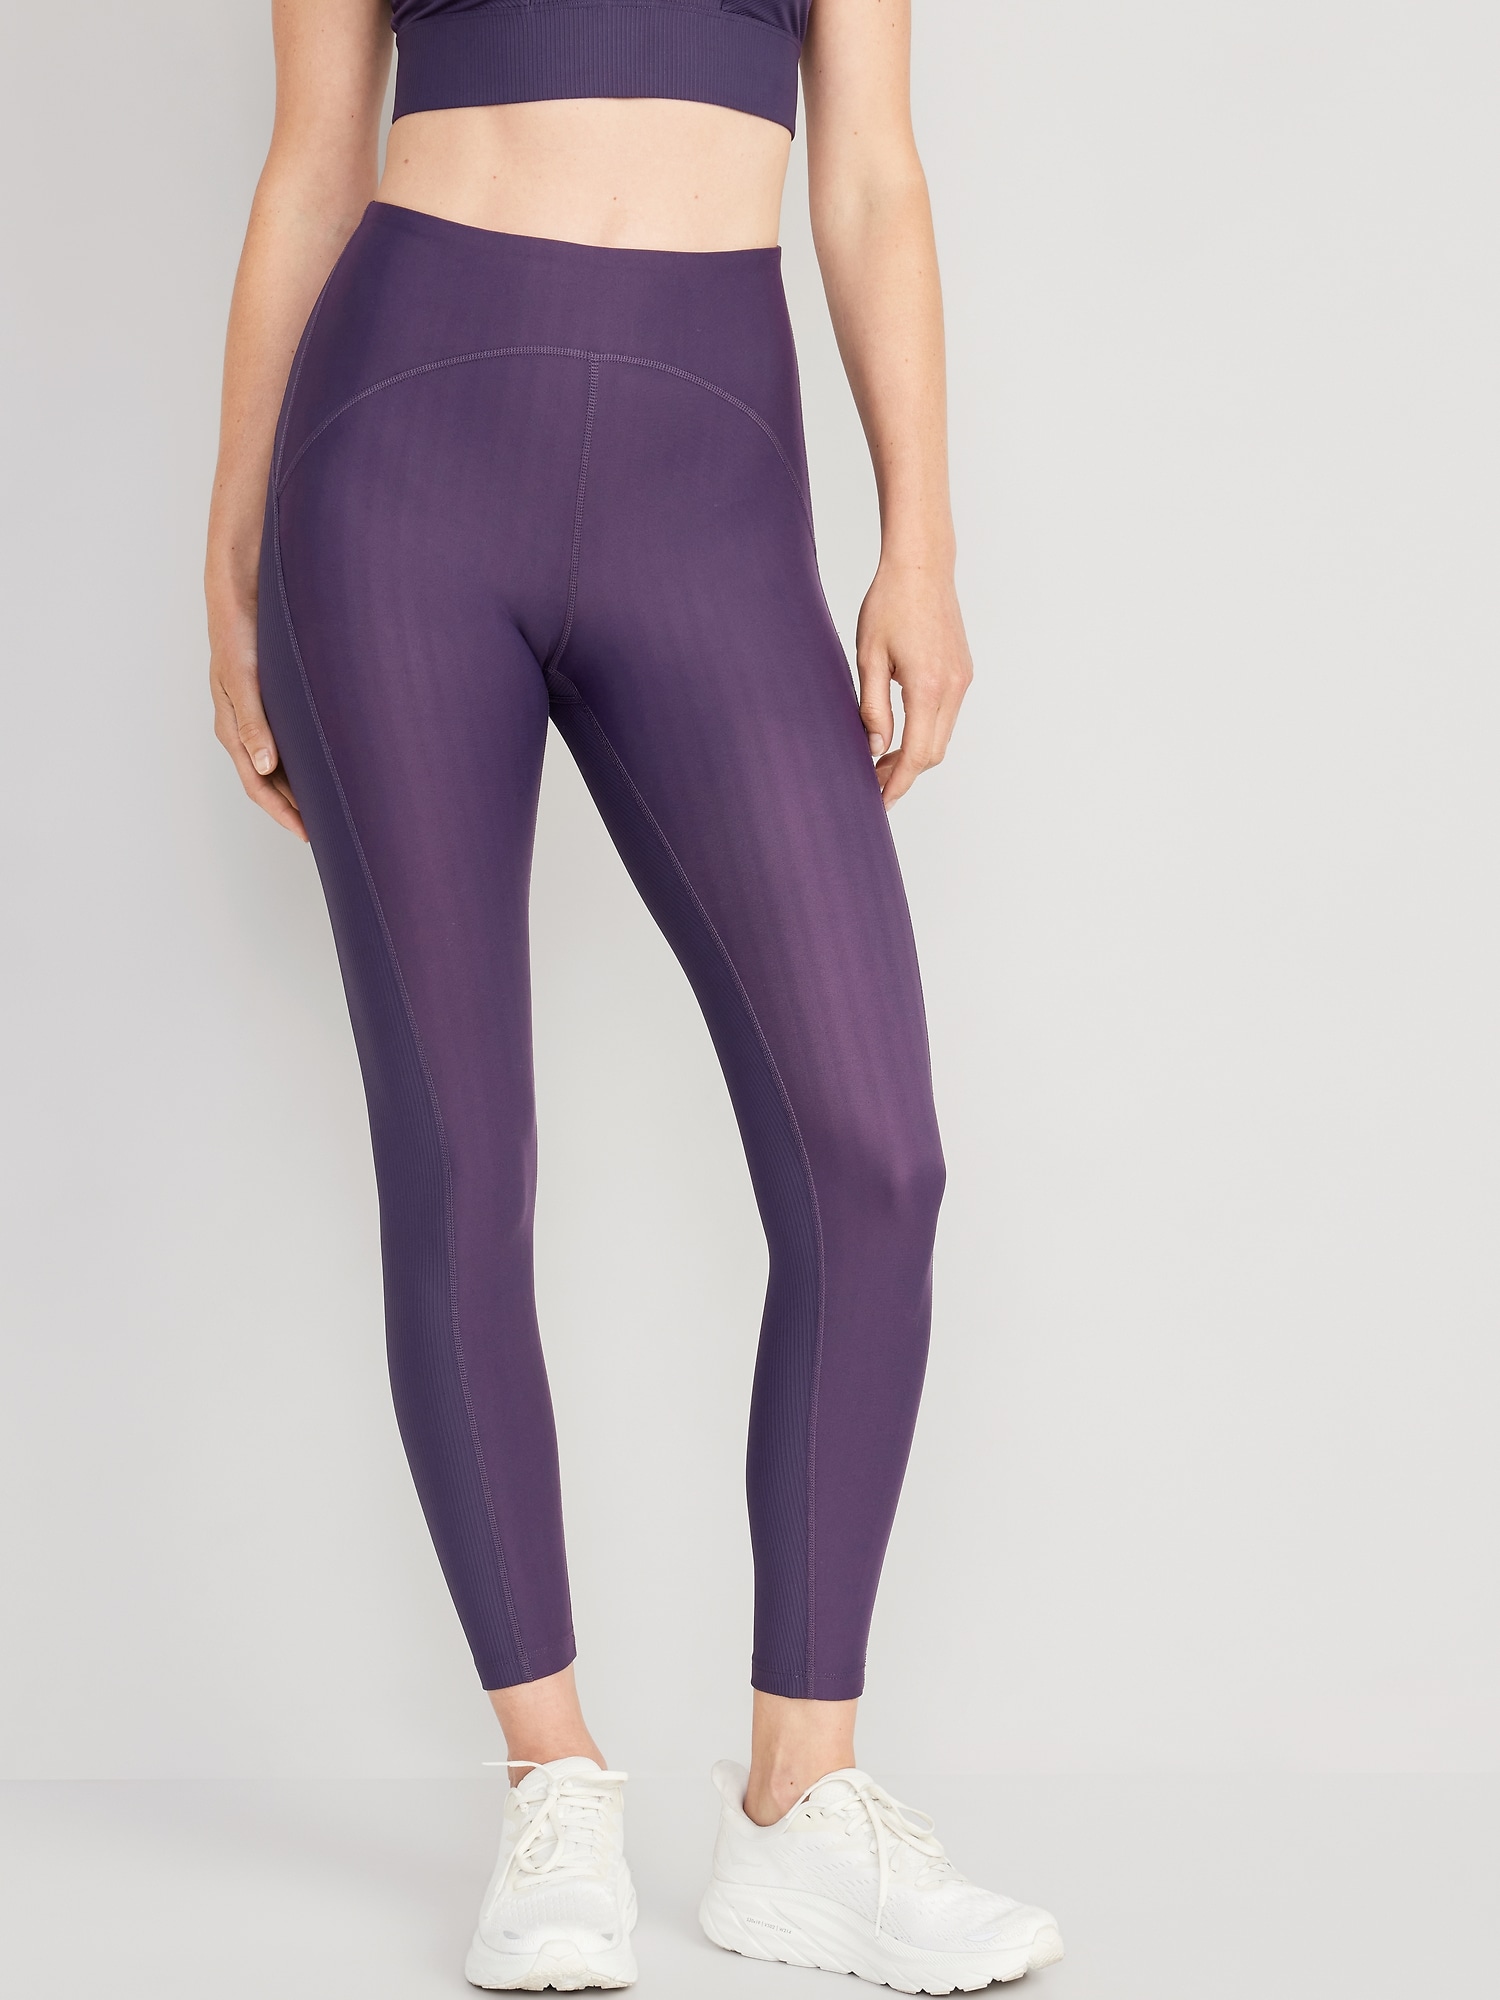 Active by Old Navy Solid Lavender Purple Leggings Size XXL - 26